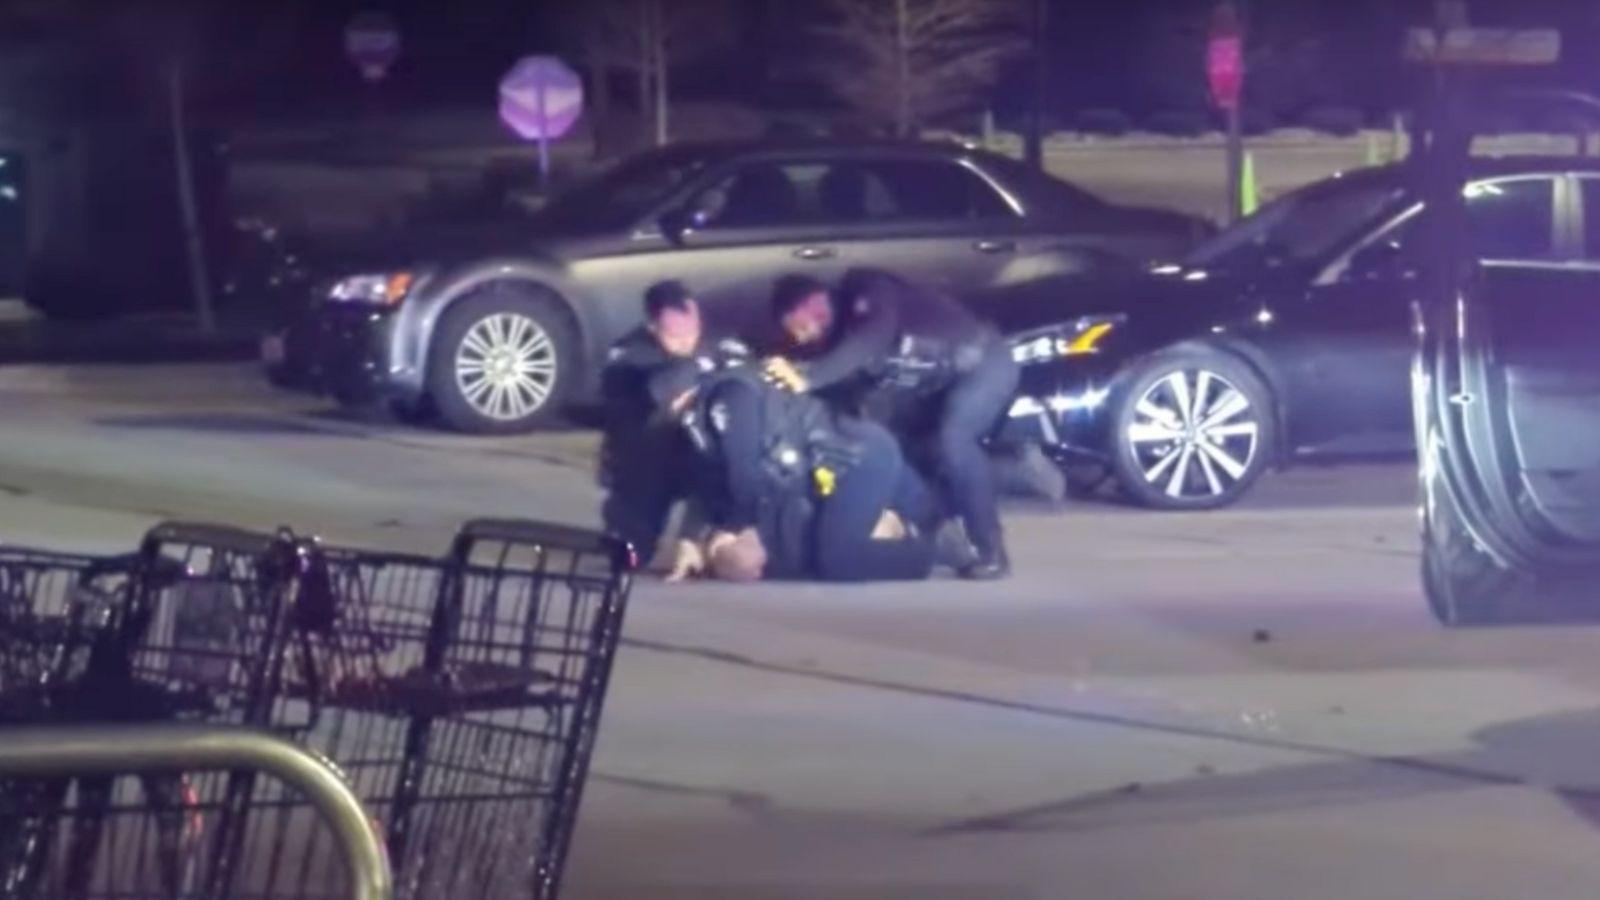 Footage showing three police officers violently arresting a suspect in a parking lot